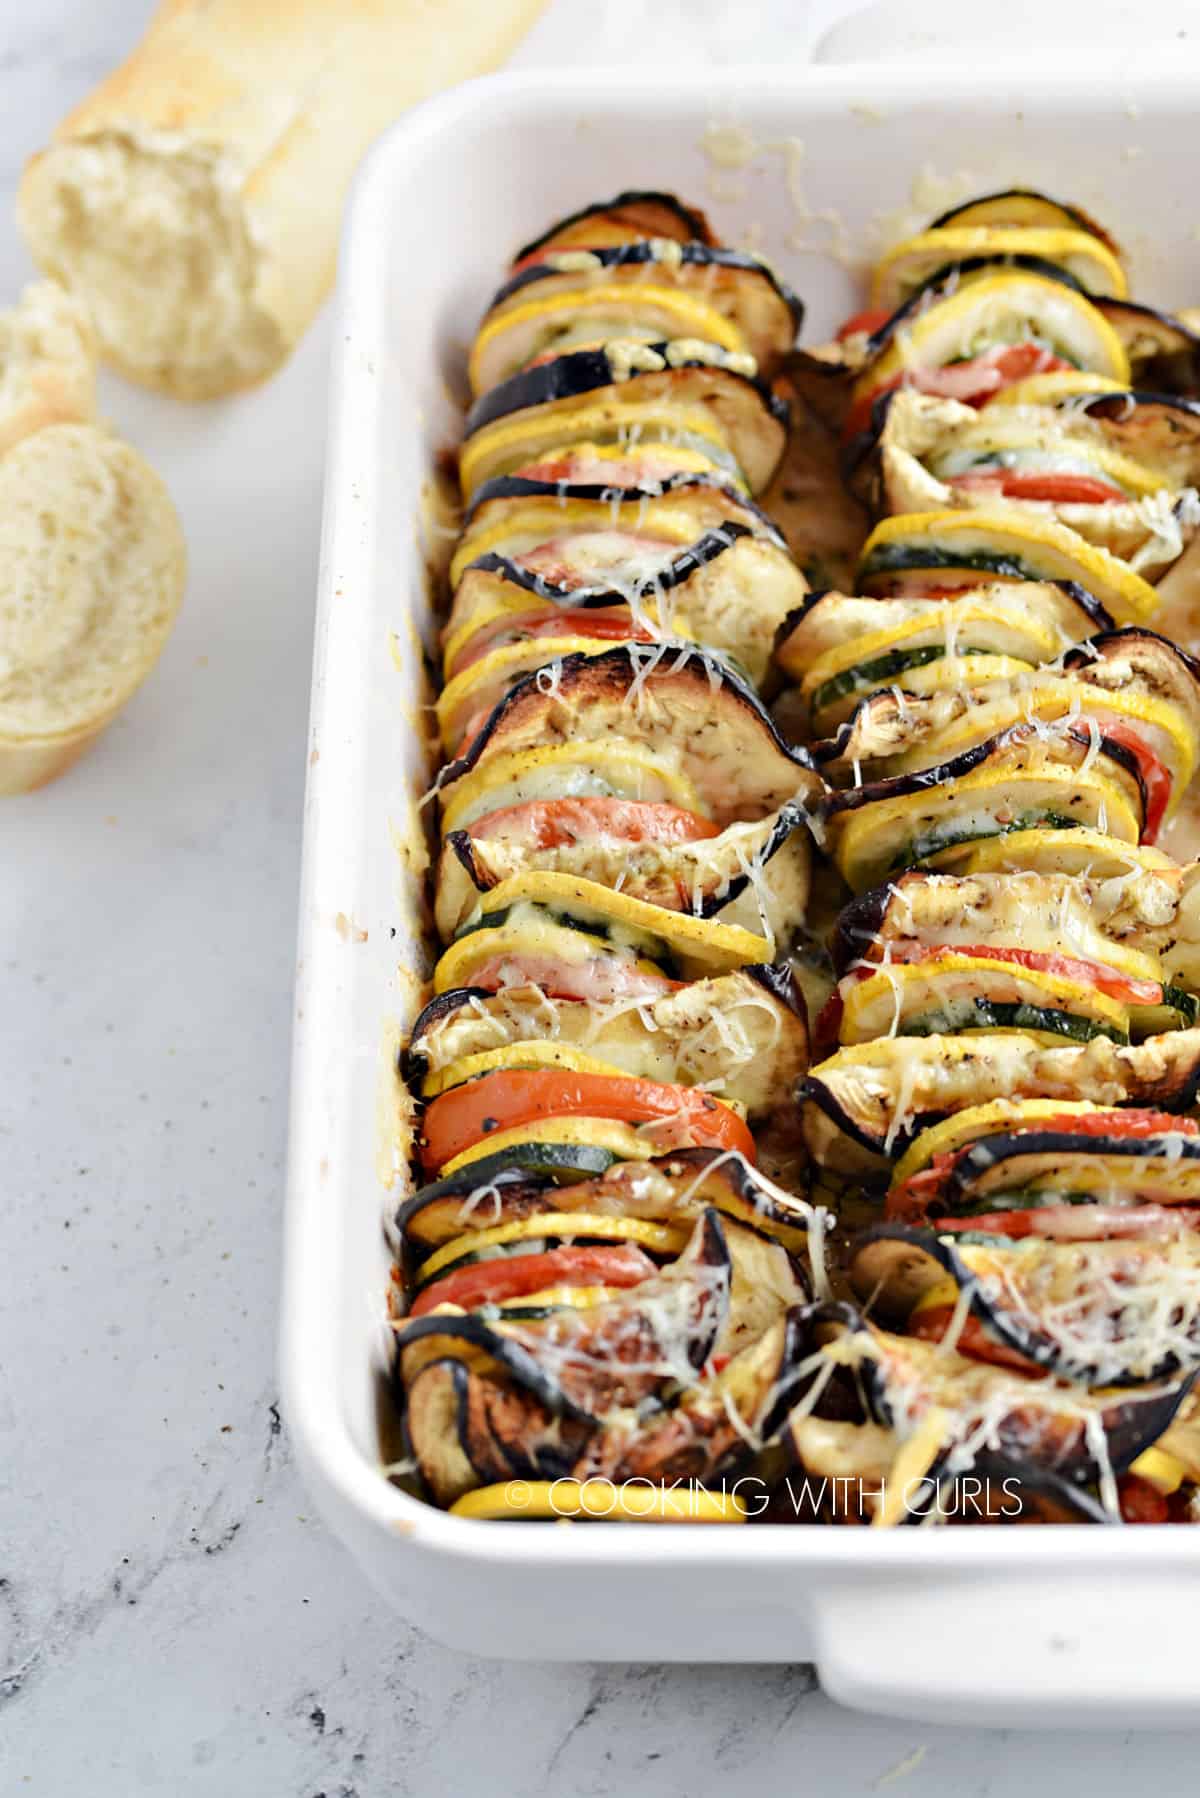 Slices of zucchini, yellow squash, eggplant and tomatoes lined up in a white baking dish topped with melted cheese with French bread in the background.